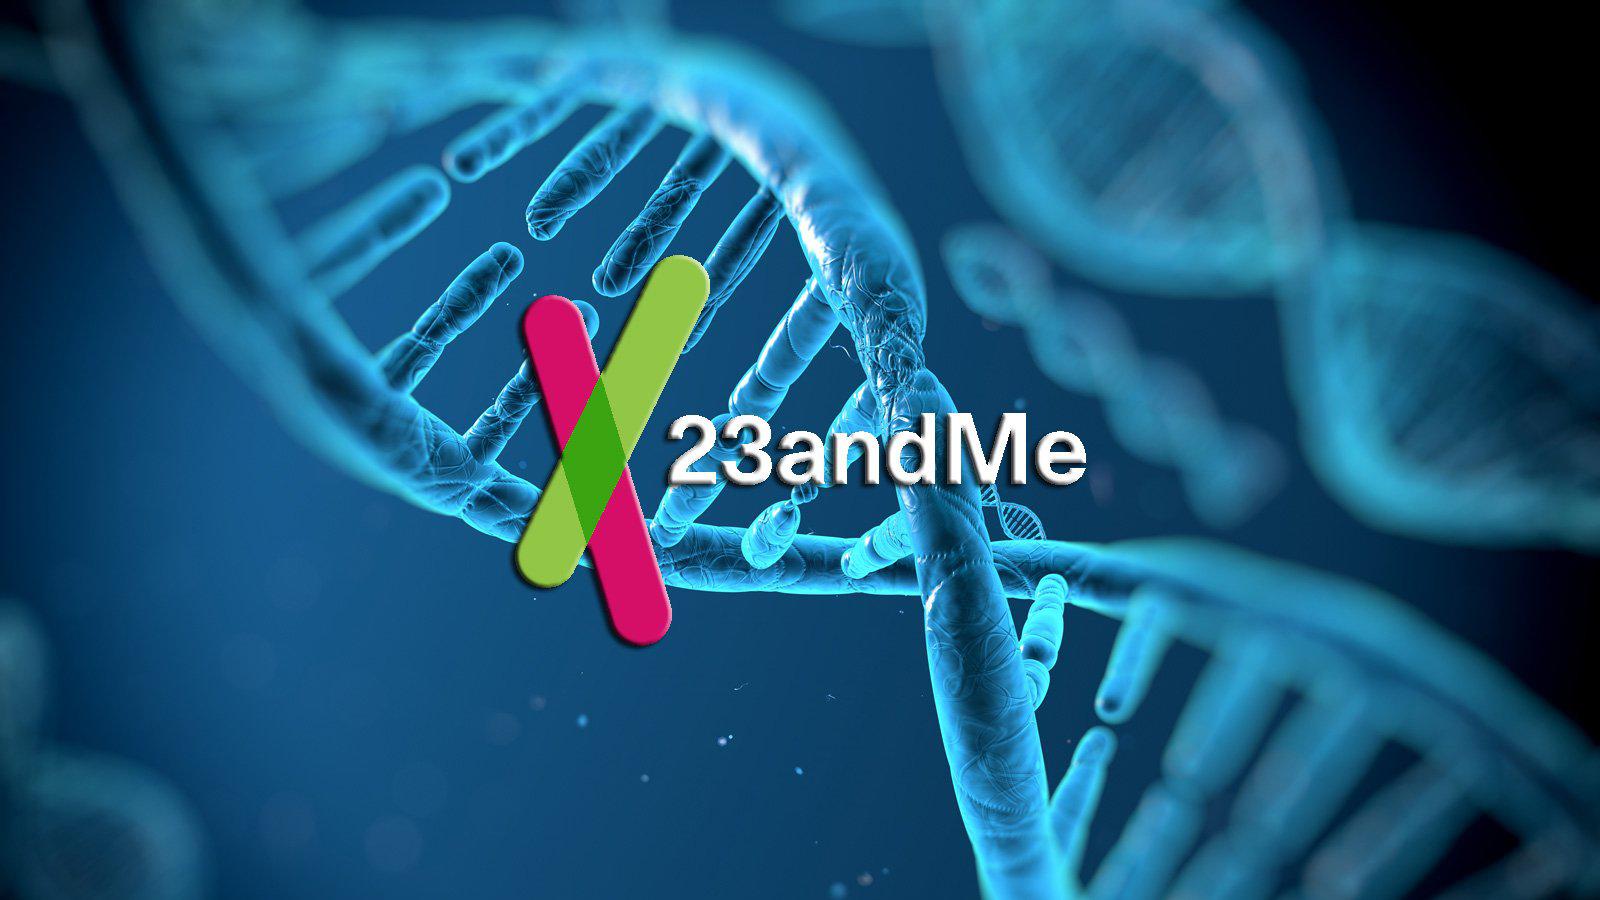 23andMe hit with lawsuits after hacker leaks stolen genetics data